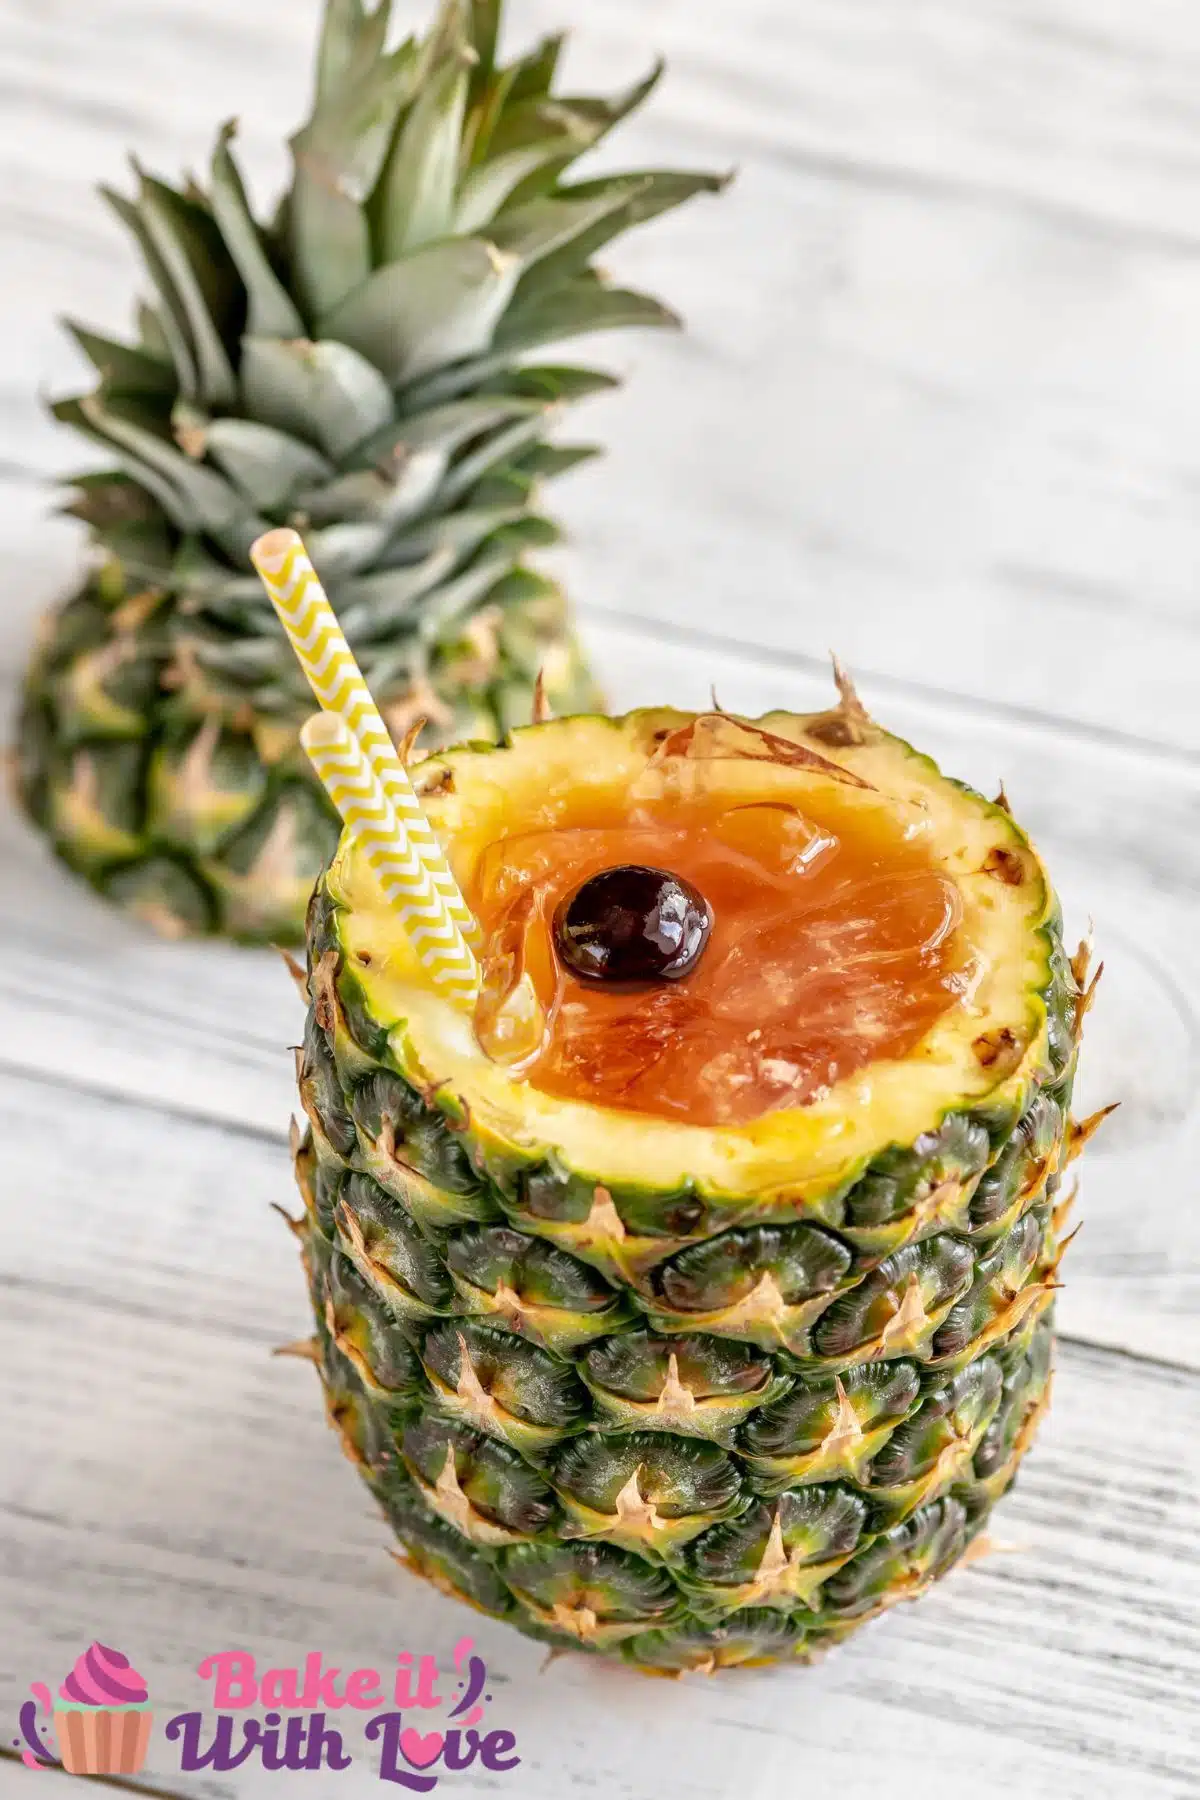 Tall image of a Bahama Mama cocktail in a cut open pineapple.